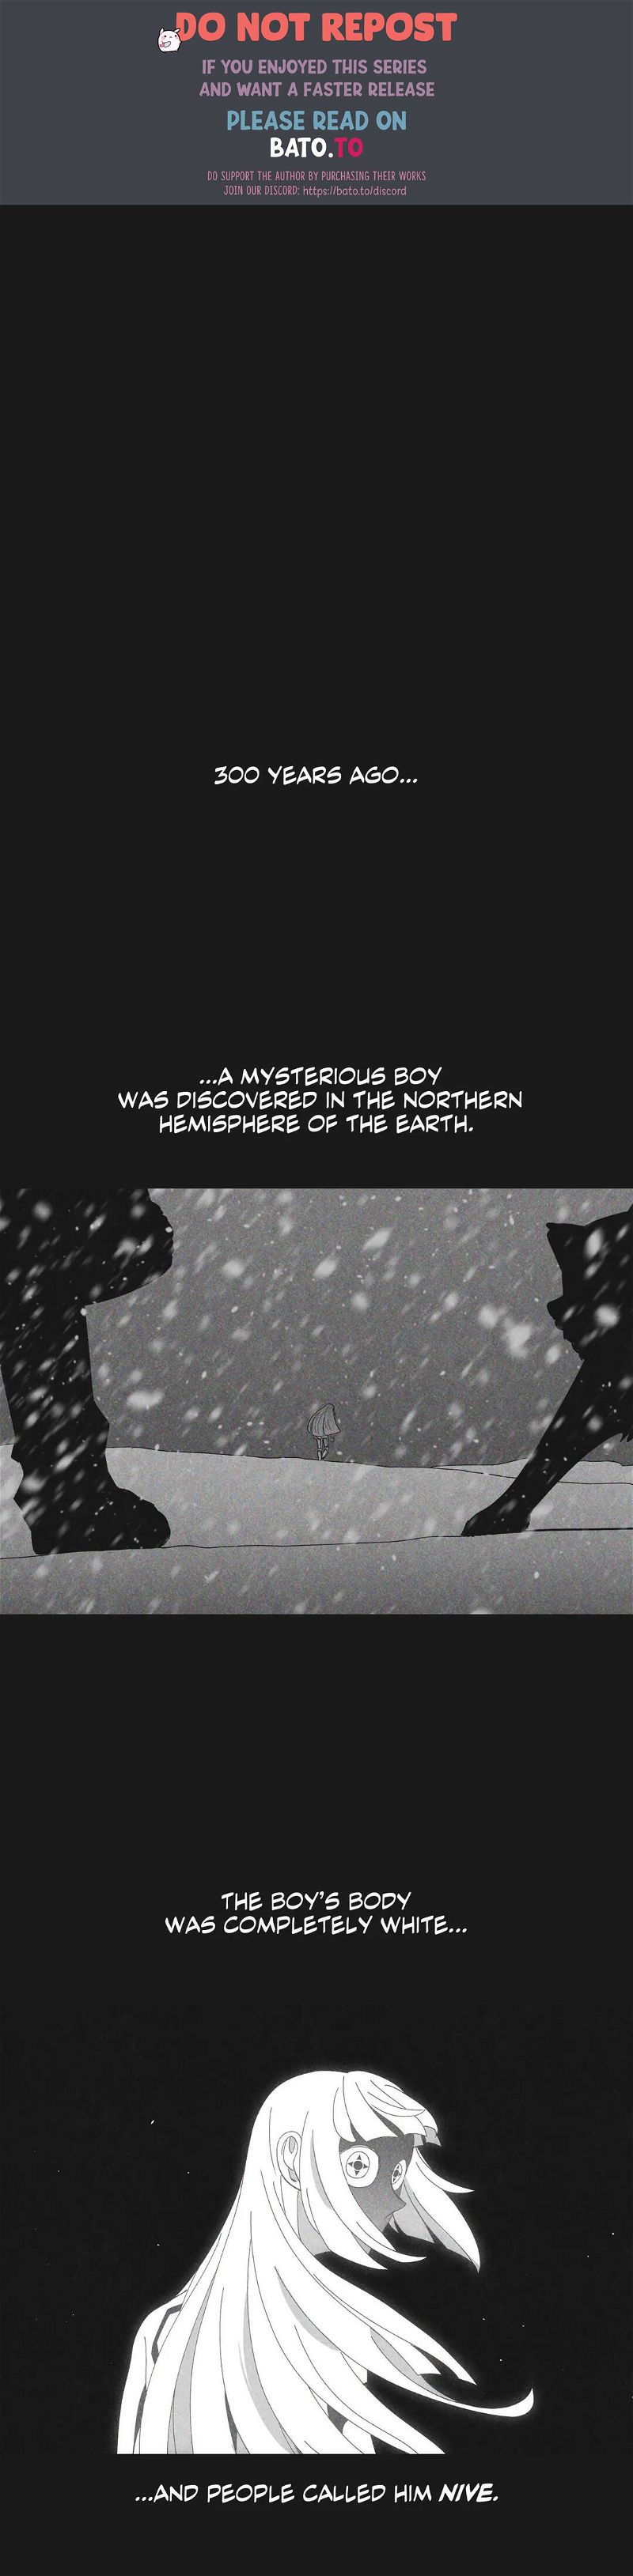 The Ashen Snowfield Chapter 66 page 1